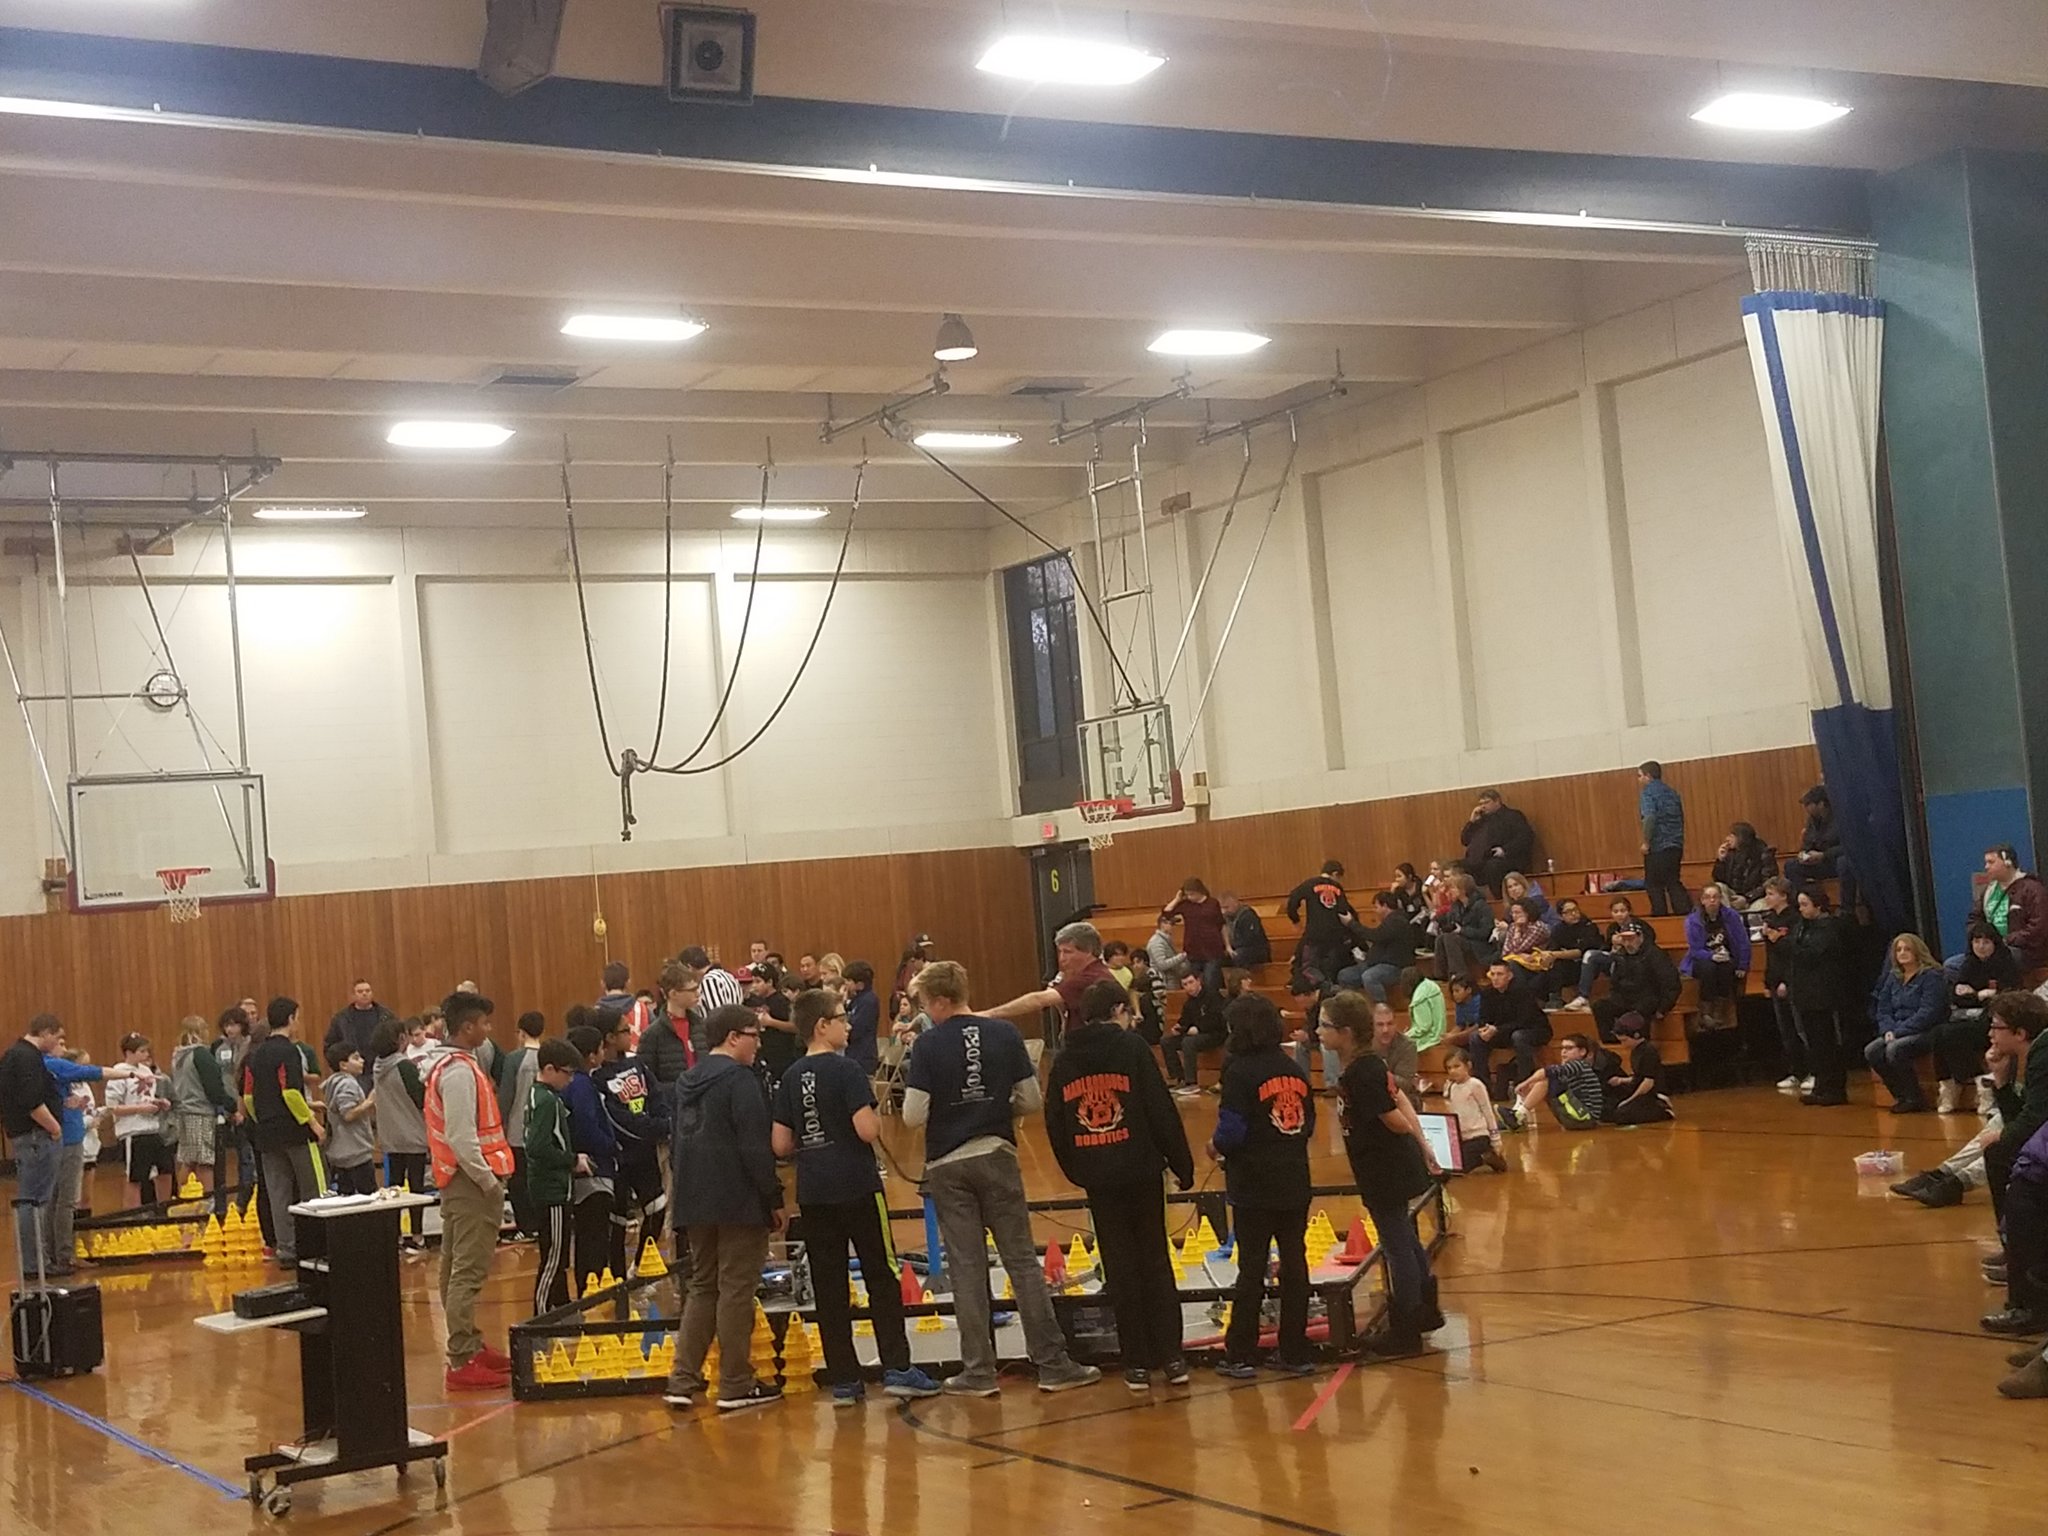 Kerry Dunne Very Cool Middle School Robotics Teams Battling At Tournament At Walsh Middle School In Framingham In Front Of 100 Spectators Stem Vexrobotics T Co I8ovxt1grw Twitter